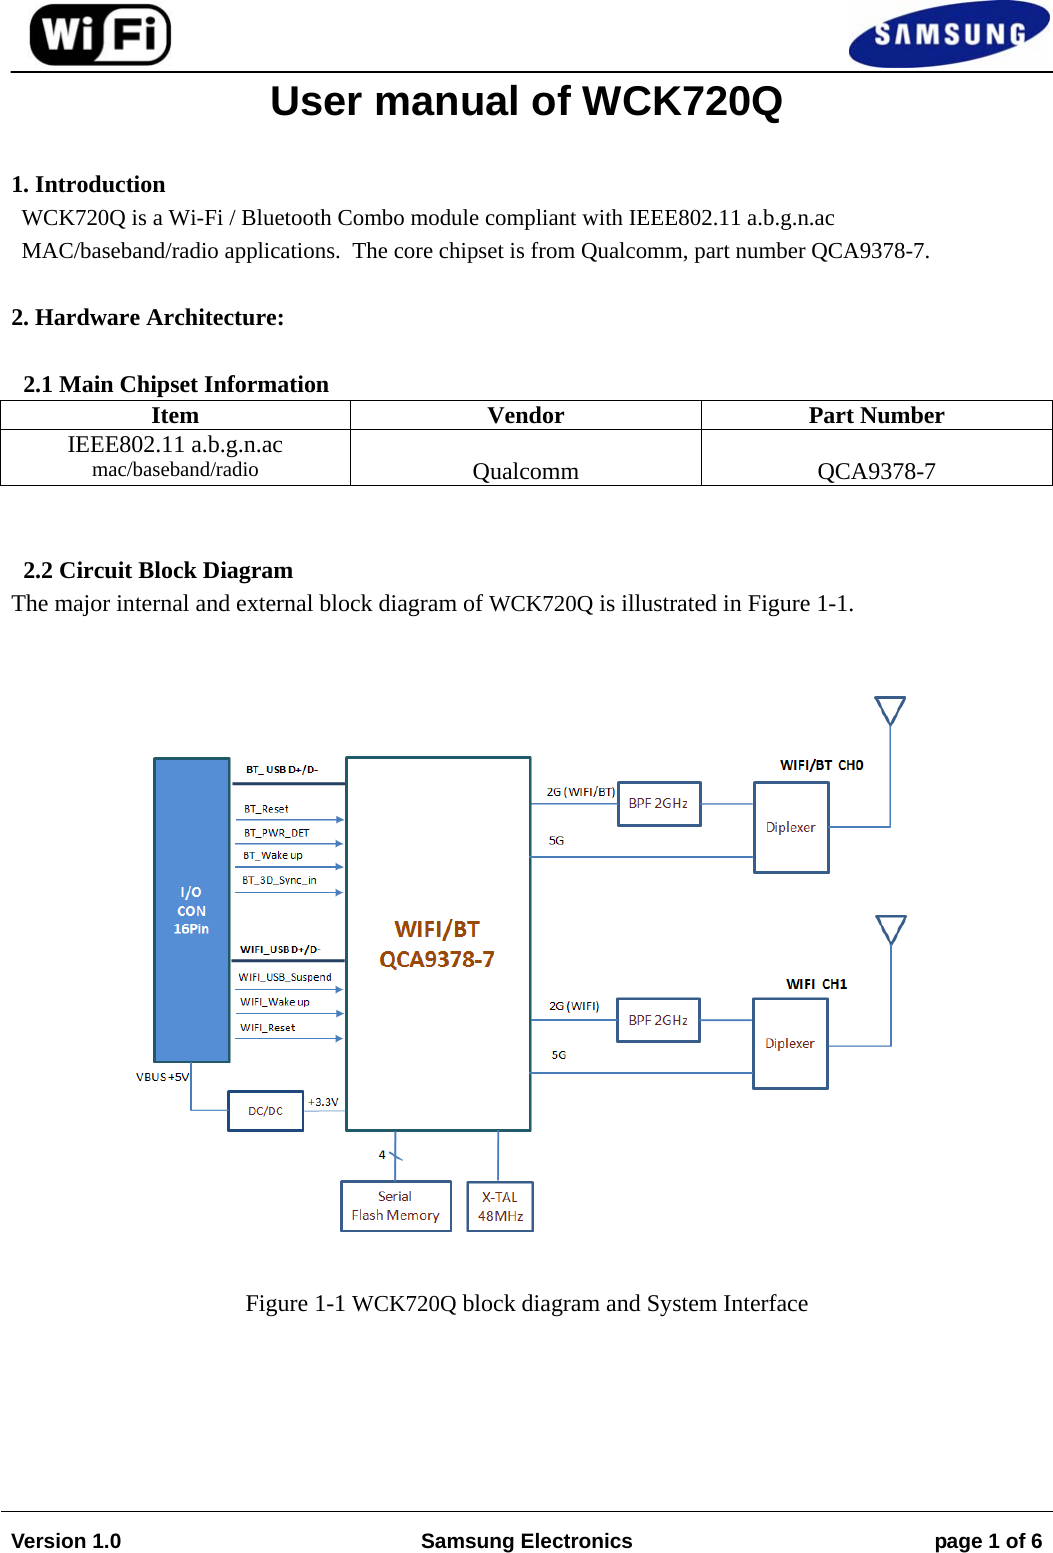                                                                                                                                         Version 1.0  Samsung Electronics  page 1 of 6   User manual of WCK720Q   1. Introduction WCK720Q is a Wi-Fi / Bluetooth Combo module compliant with IEEE802.11 a.b.g.n.ac  MAC/baseband/radio applications.  The core chipset is from Qualcomm, part number QCA9378-7.  2. Hardware Architecture:  2.1 Main Chipset Information Item Vendor Part Number IEEE802.11 a.b.g.n.ac mac/baseband/radio   Qualcomm   QCA9378-7   2.2 Circuit Block Diagram The major internal and external block diagram of WCK720Q is illustrated in Figure 1-1.   Figure 1-1 WCK720Q block diagram and System Interface      